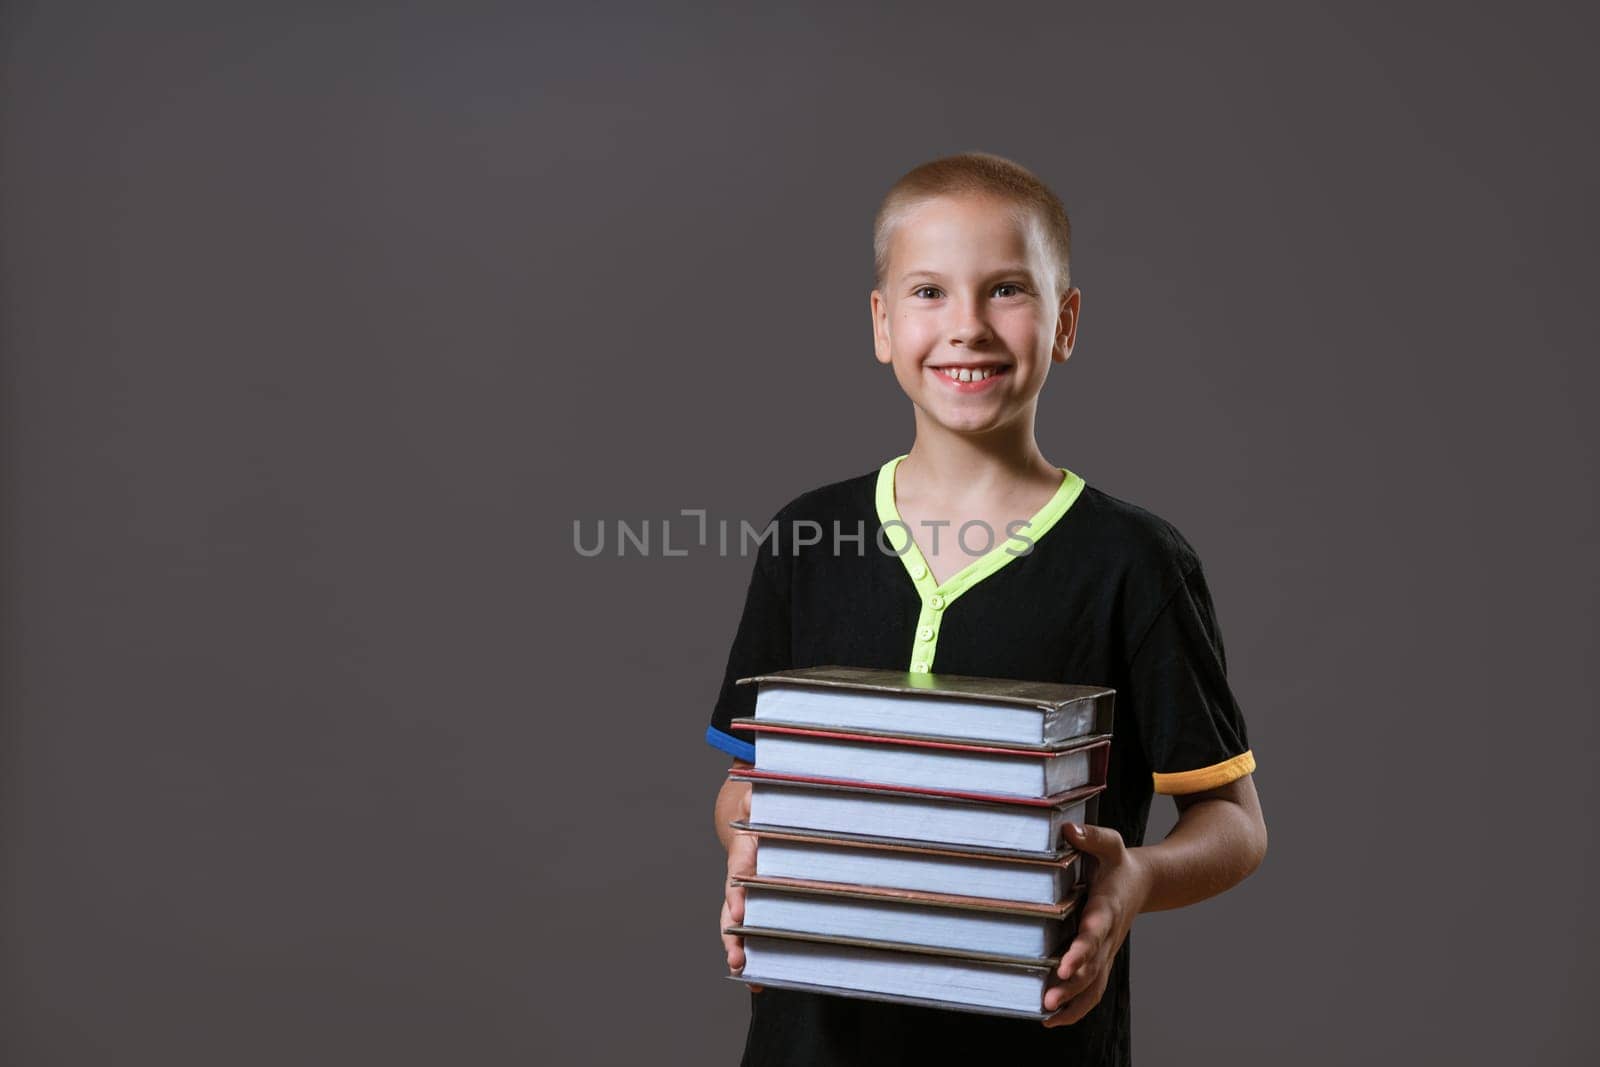 Cheerful boy holding a stack of books on a gray background by EkaterinaPereslavtseva